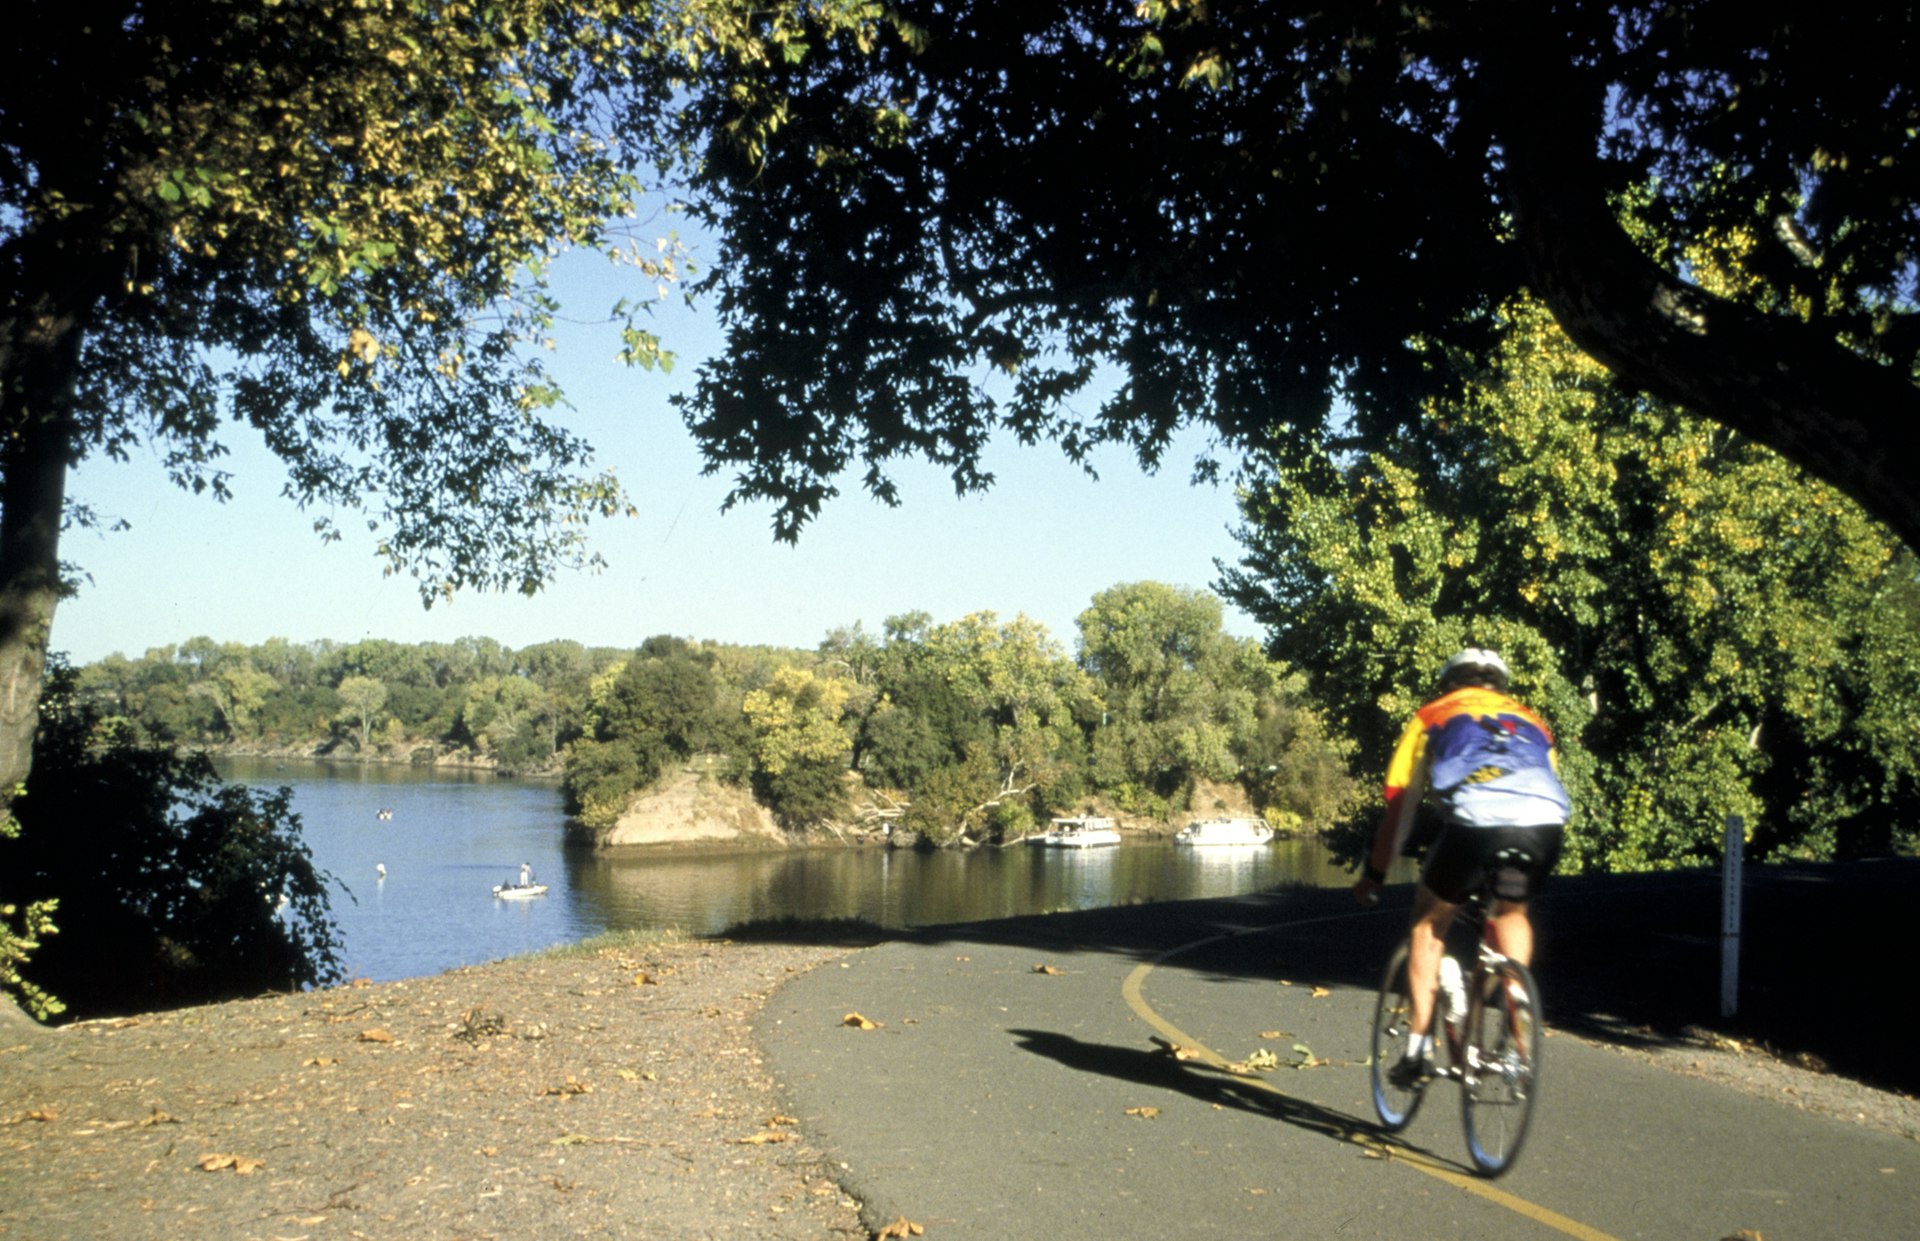 A cyclist on the tree-lined American River Bike Trail in Sacramento